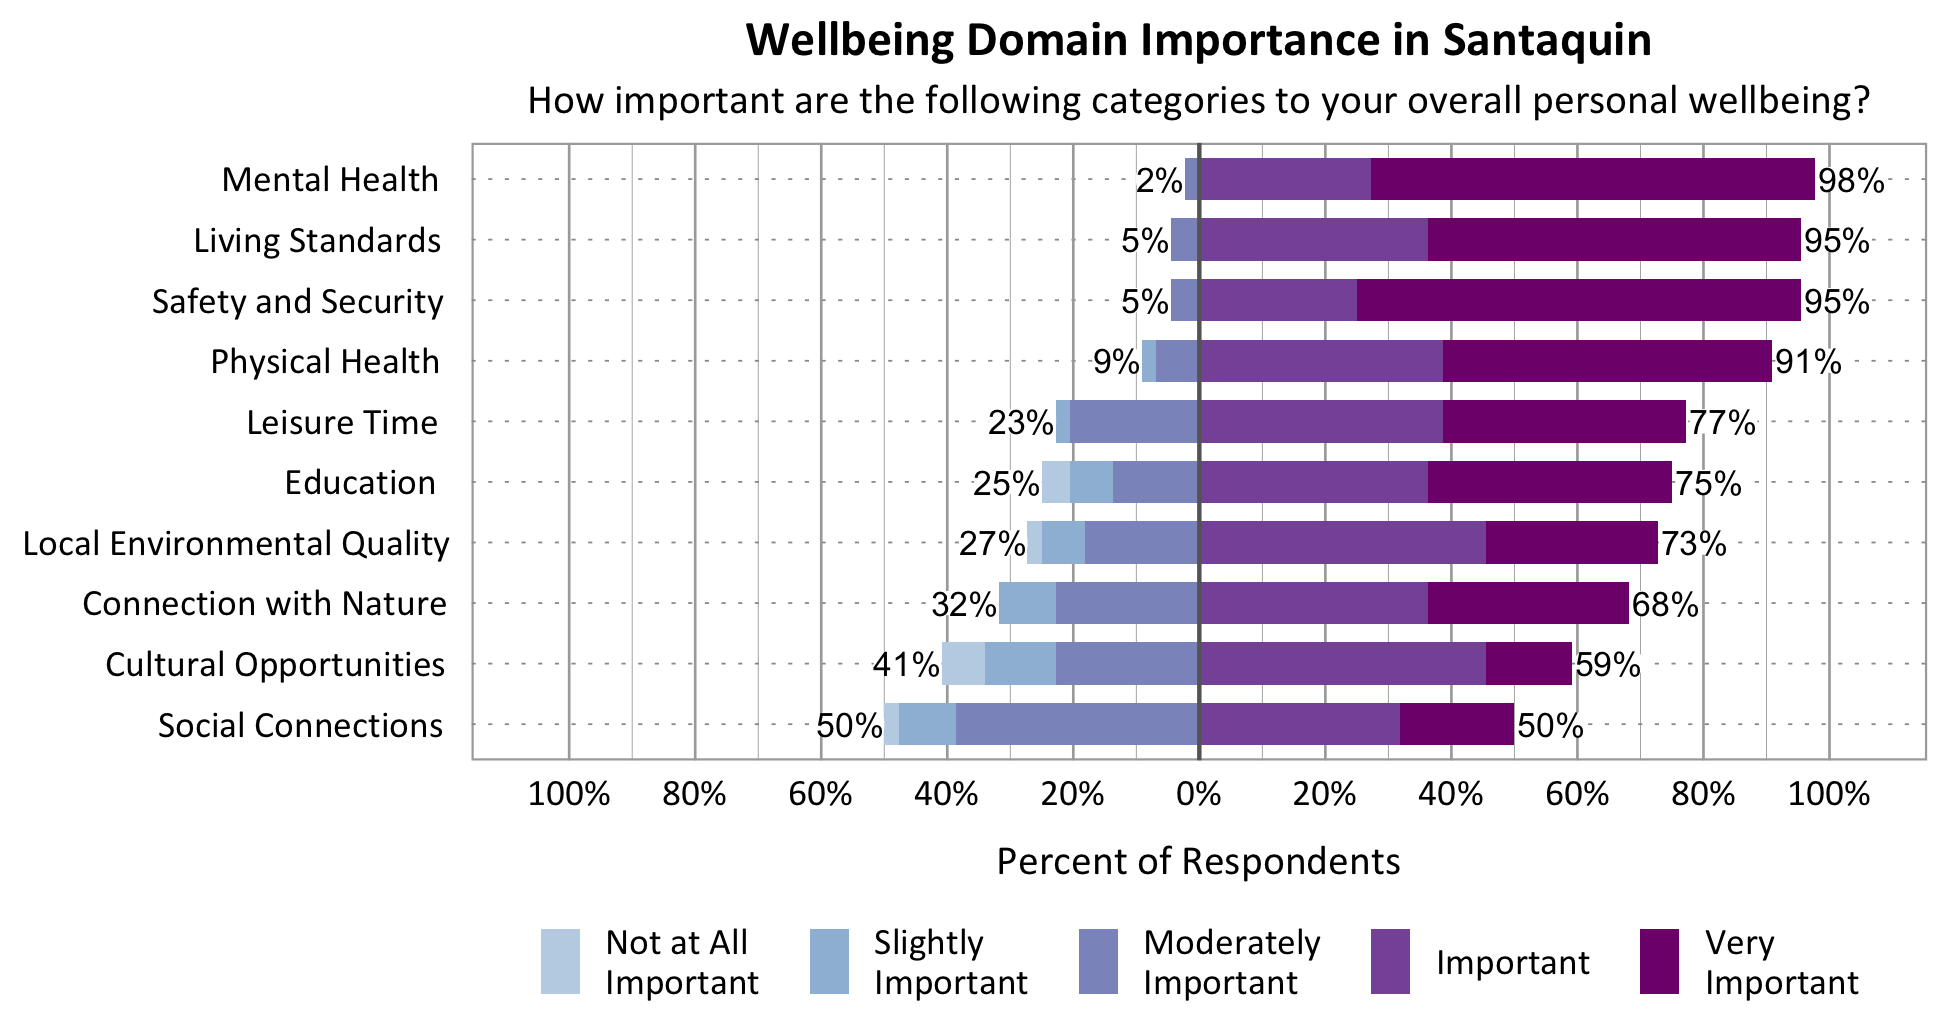 Likert Graph. Title: Wellbeing Domain Importance in Santaquin. Subtitle: How important are the following categories to your overall personal wellbeing? Category: Safety and Security - 5% of respondents rated as not at all important, slightly important, or moderately important while 95% rated as important or very important; Category: Mental Health - 2% of respondents rated as not at all important, slightly important, or moderately important while 98% rated as important or very important; Category: Physical Health - 9% of respondents rated as not at all important, slightly important, or moderately important while 91% rated as important or very important; Category: Living Standards - 5% of respondents rated as not at all important, slightly important, or moderately important while 95% rated as important or very important; Category: Connection with Nature - 32% of respondents rated as not at all important, slightly important, or moderately important while 68% of respondents rated as important or very important; Category: Leisure Time - 23% of respondents rated as not at all important, slightly important, or moderately important while 77% rated as important or very important; Category: Local Environmental Quality - 27% of respondents rated as not at all important, slightly important, or moderately important while 73% rated as important or very important; Category: Social Connections - 50% rated as not at all important, slightly important, or moderately important while 50% rated as important or very important; Category: Education – 25% of respondents rated as not at all important, slightly important, or moderately important while 75% rated as important or very important; Category: Cultural Opportunities - 41% rated as not at all important, slightly important, or moderately important while 59% rated as important or very important.